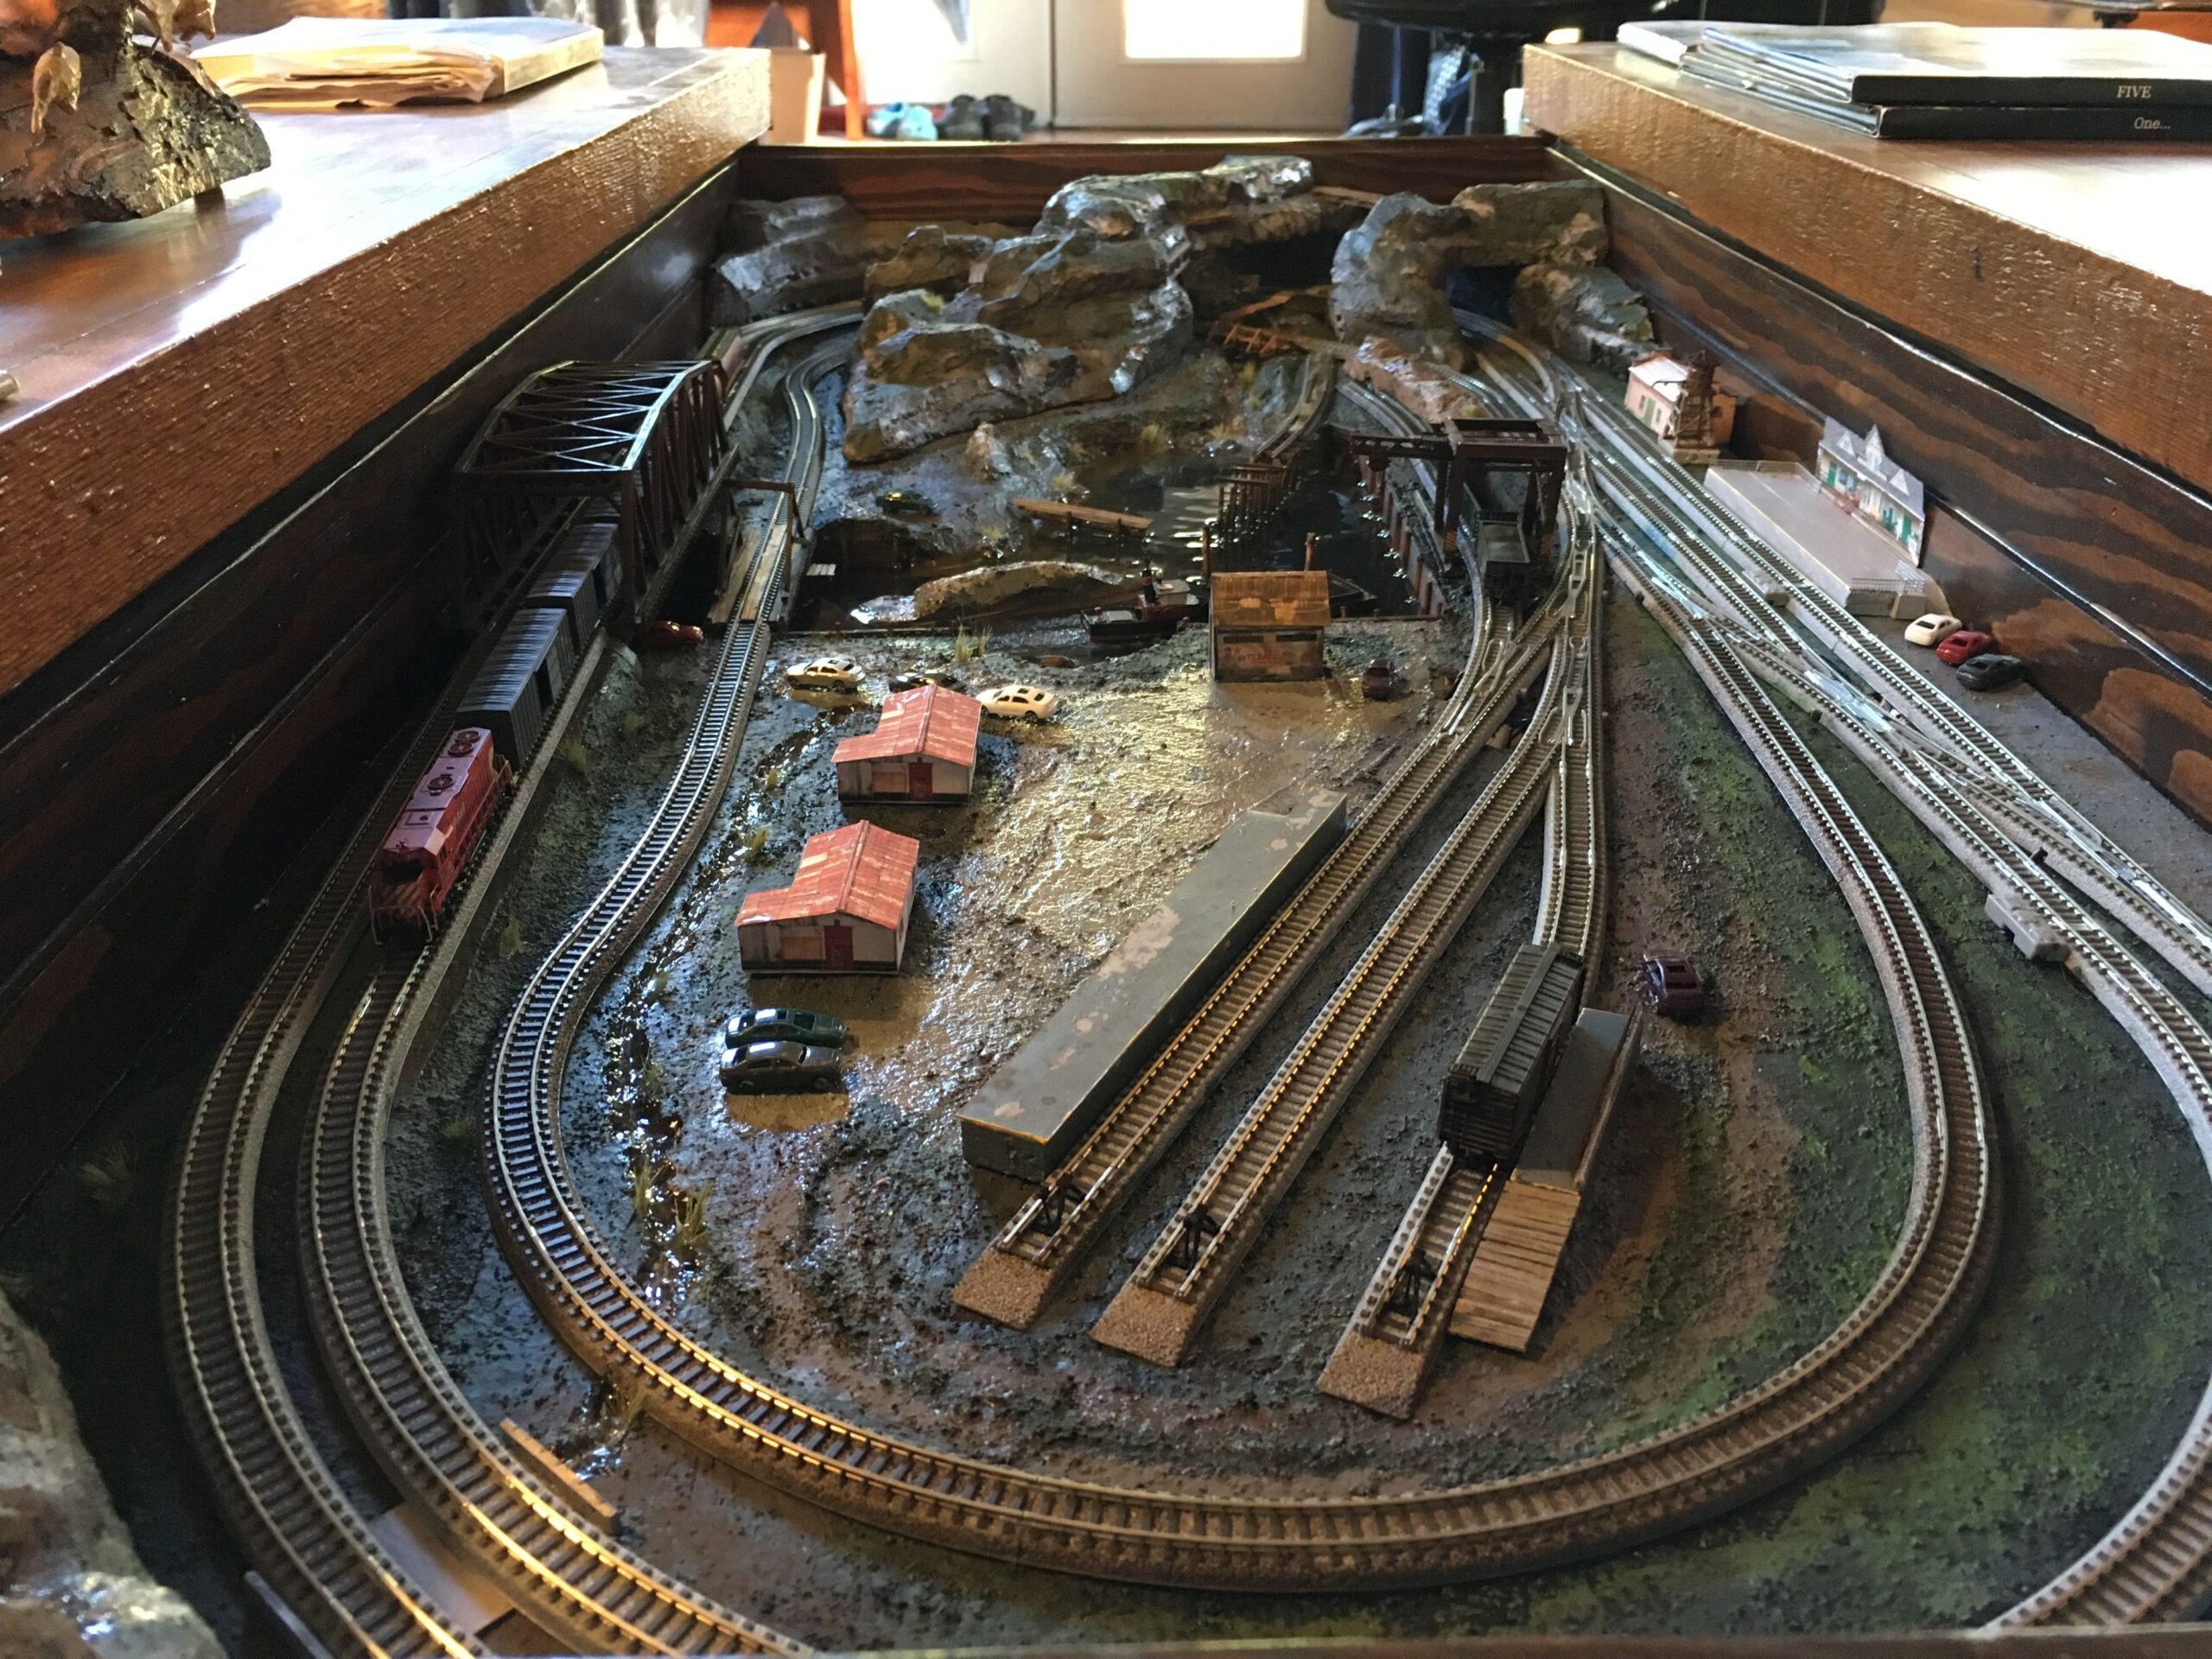 https://www.jamesmodeltrains.com/wp-content/uploads/2023/11/coffee-table-train-layout-z-scale-1-scaled.jpeg